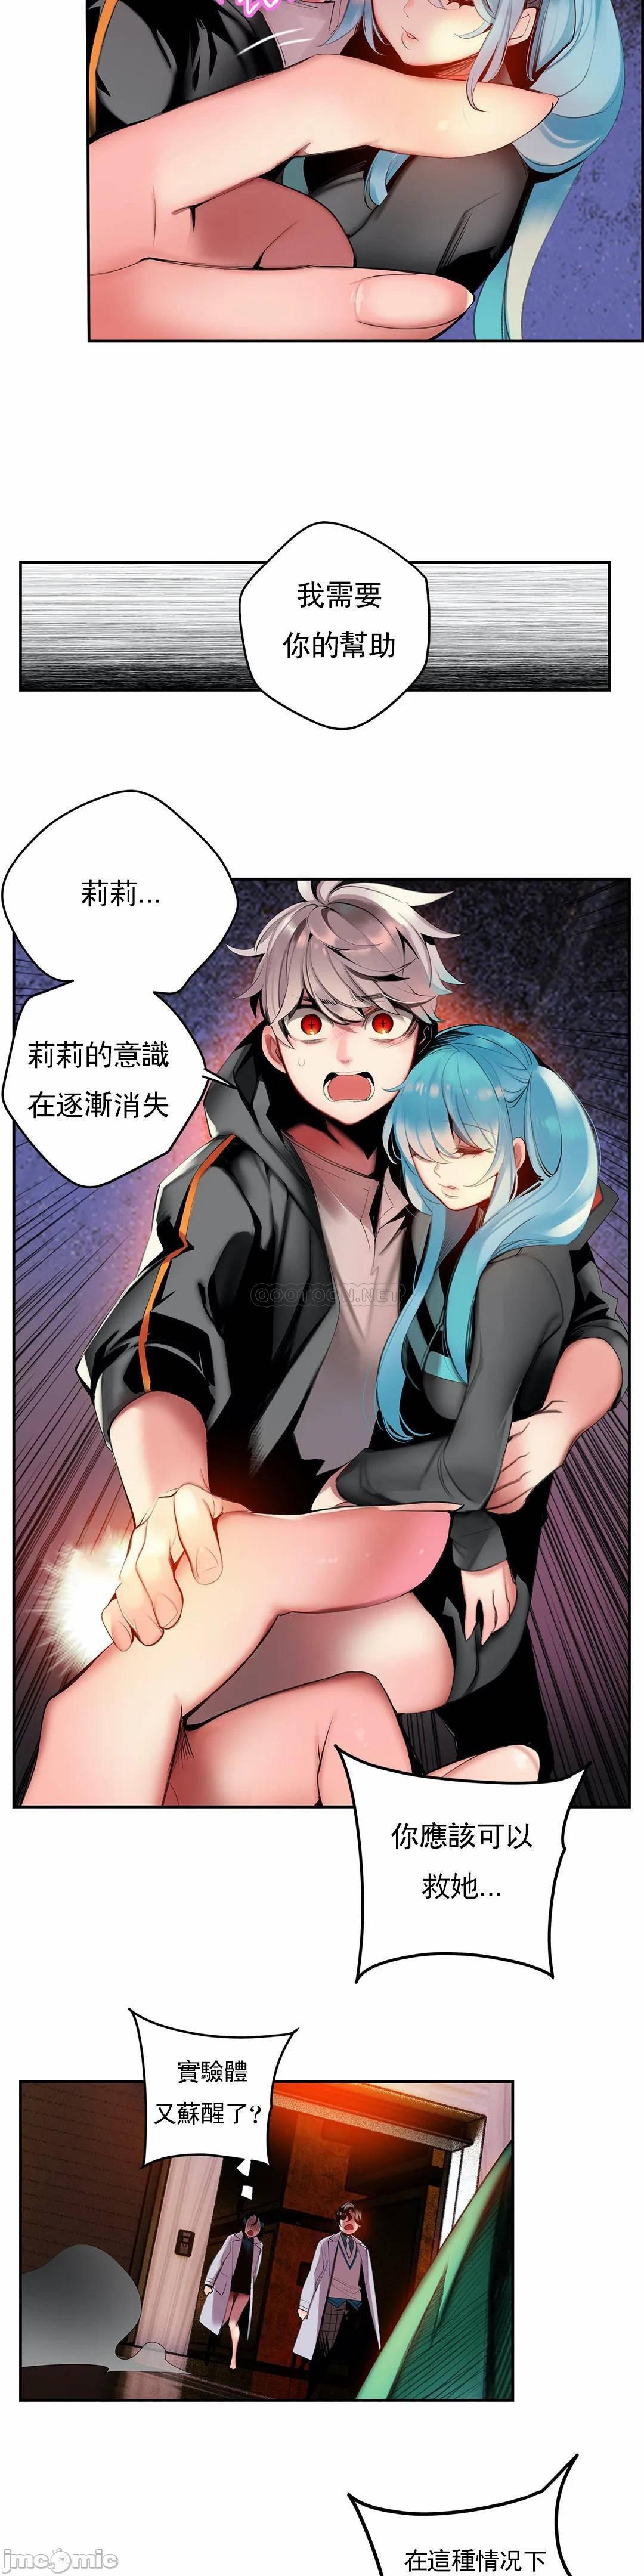 [Juder] Lilith`s Cord (第二季) Ch.77-93 end [Chinese] 407